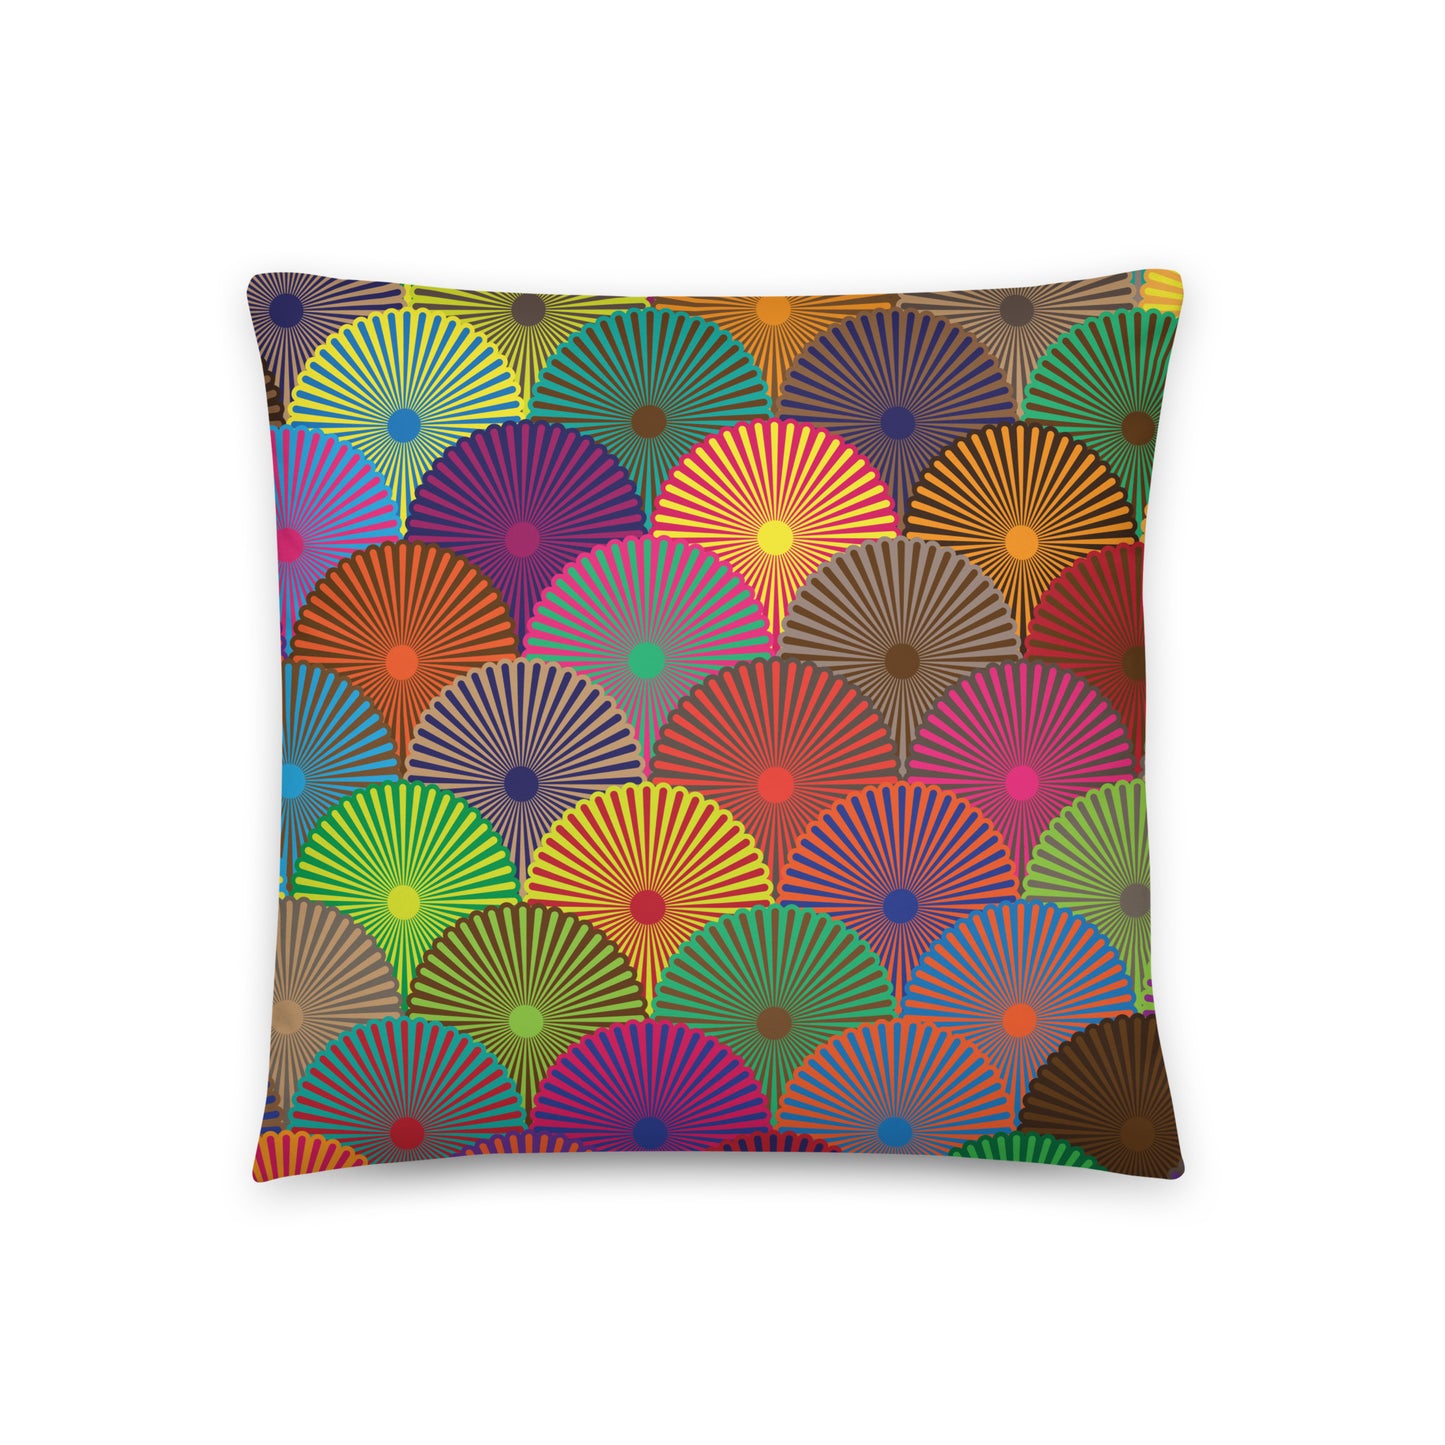 Colorful Flower Circles - Sustainably Made Pillows